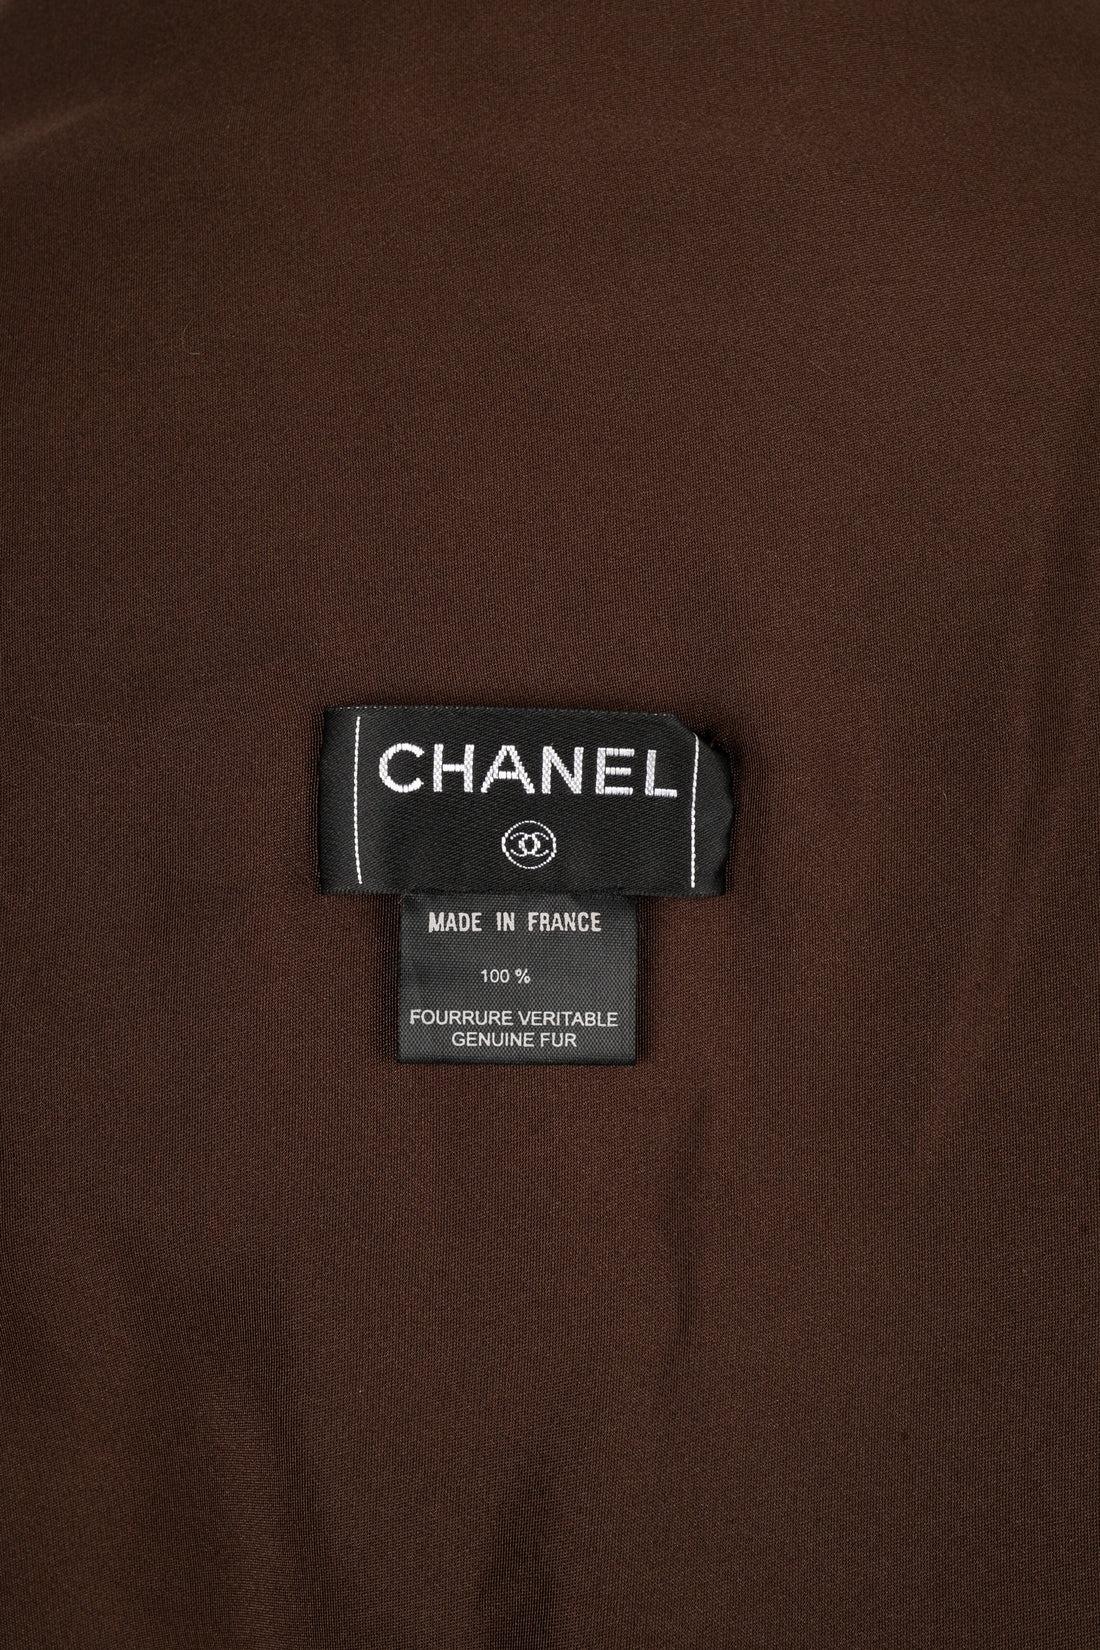 Chanel Fur Large Stole in Copper-Brown Orylag with a Brown Silk Lining For Sale 4